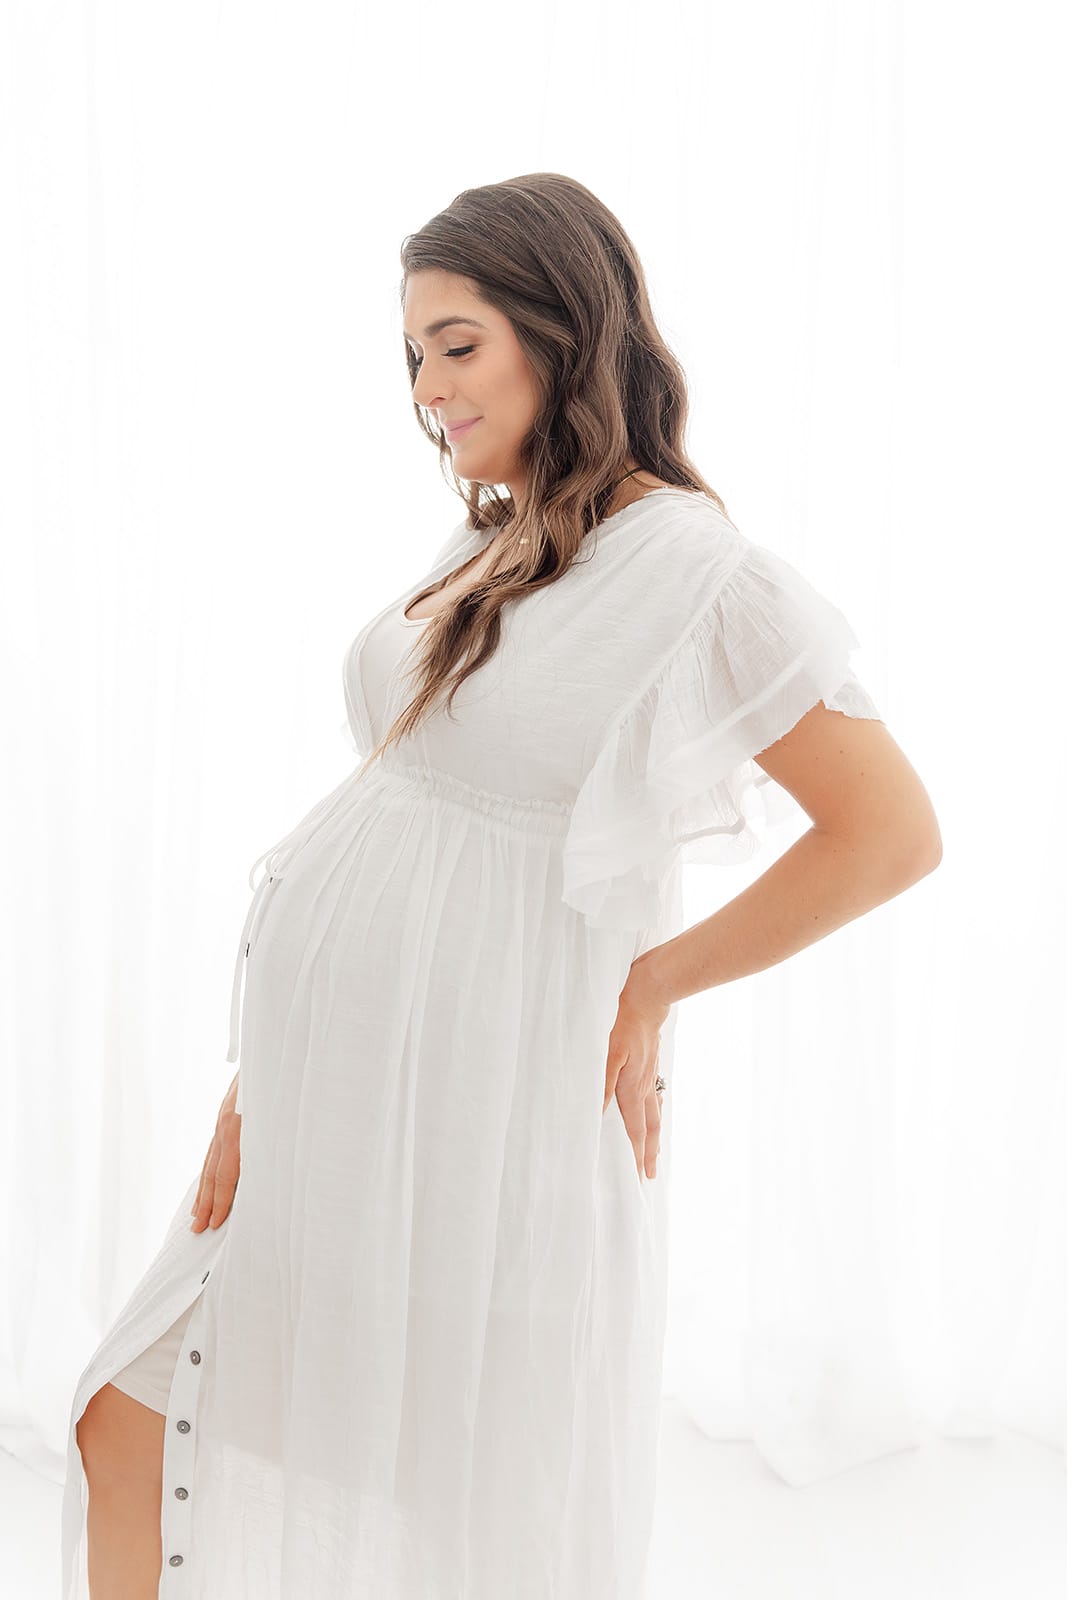 A Pensacola maternity photographer captures a radiant pregnant woman in a white maternity dress.